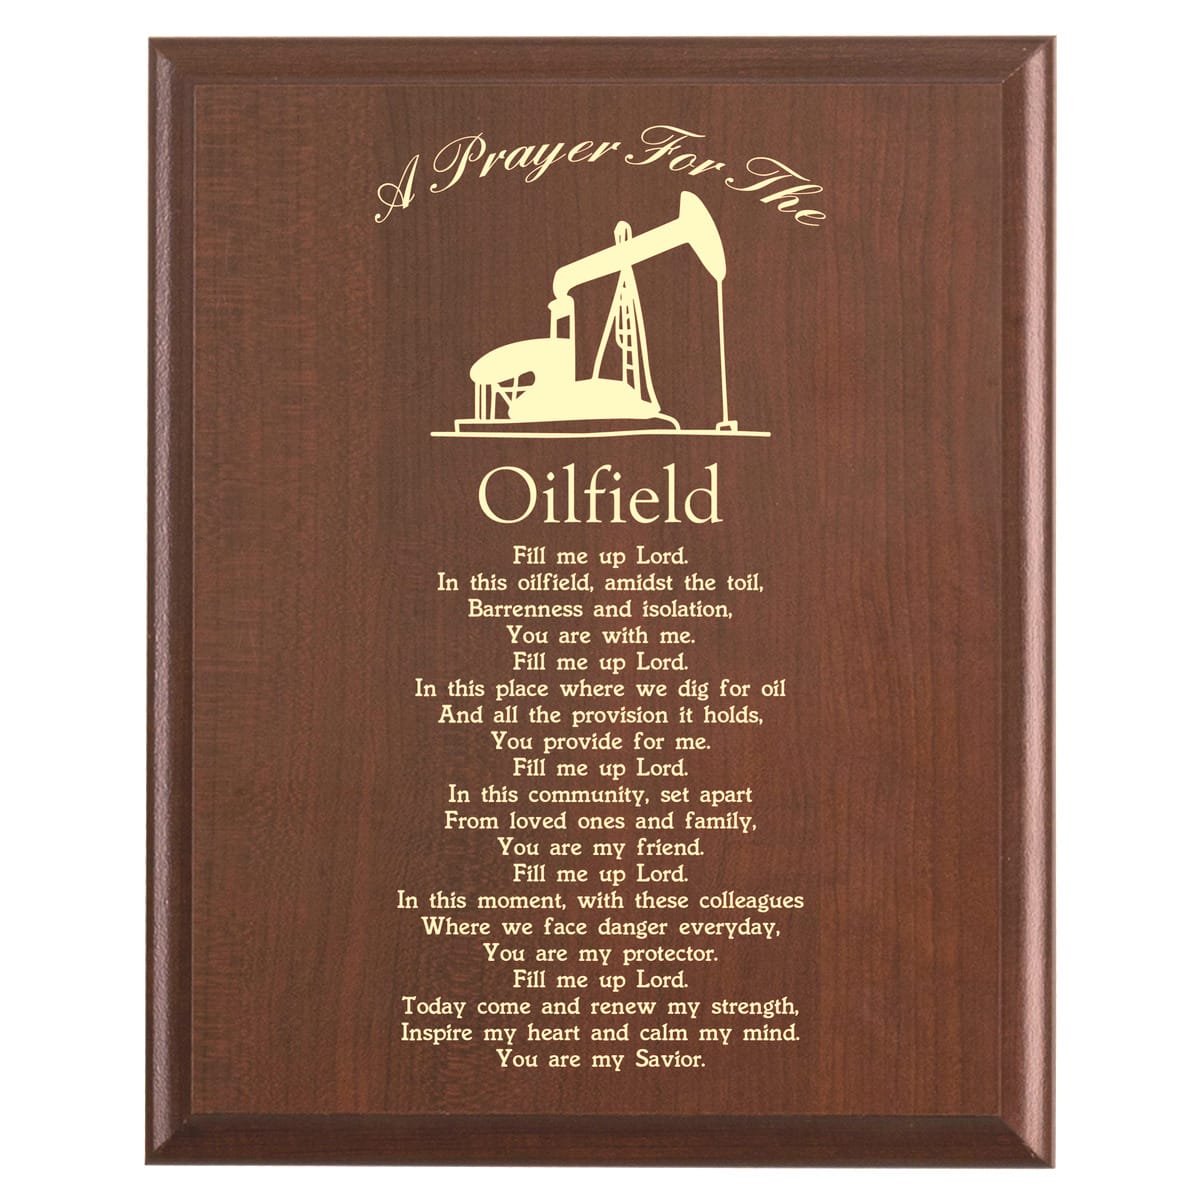 Plaque photo: Oilfield Prayer Plaque design with free personalization. Wood style finish with customized text.